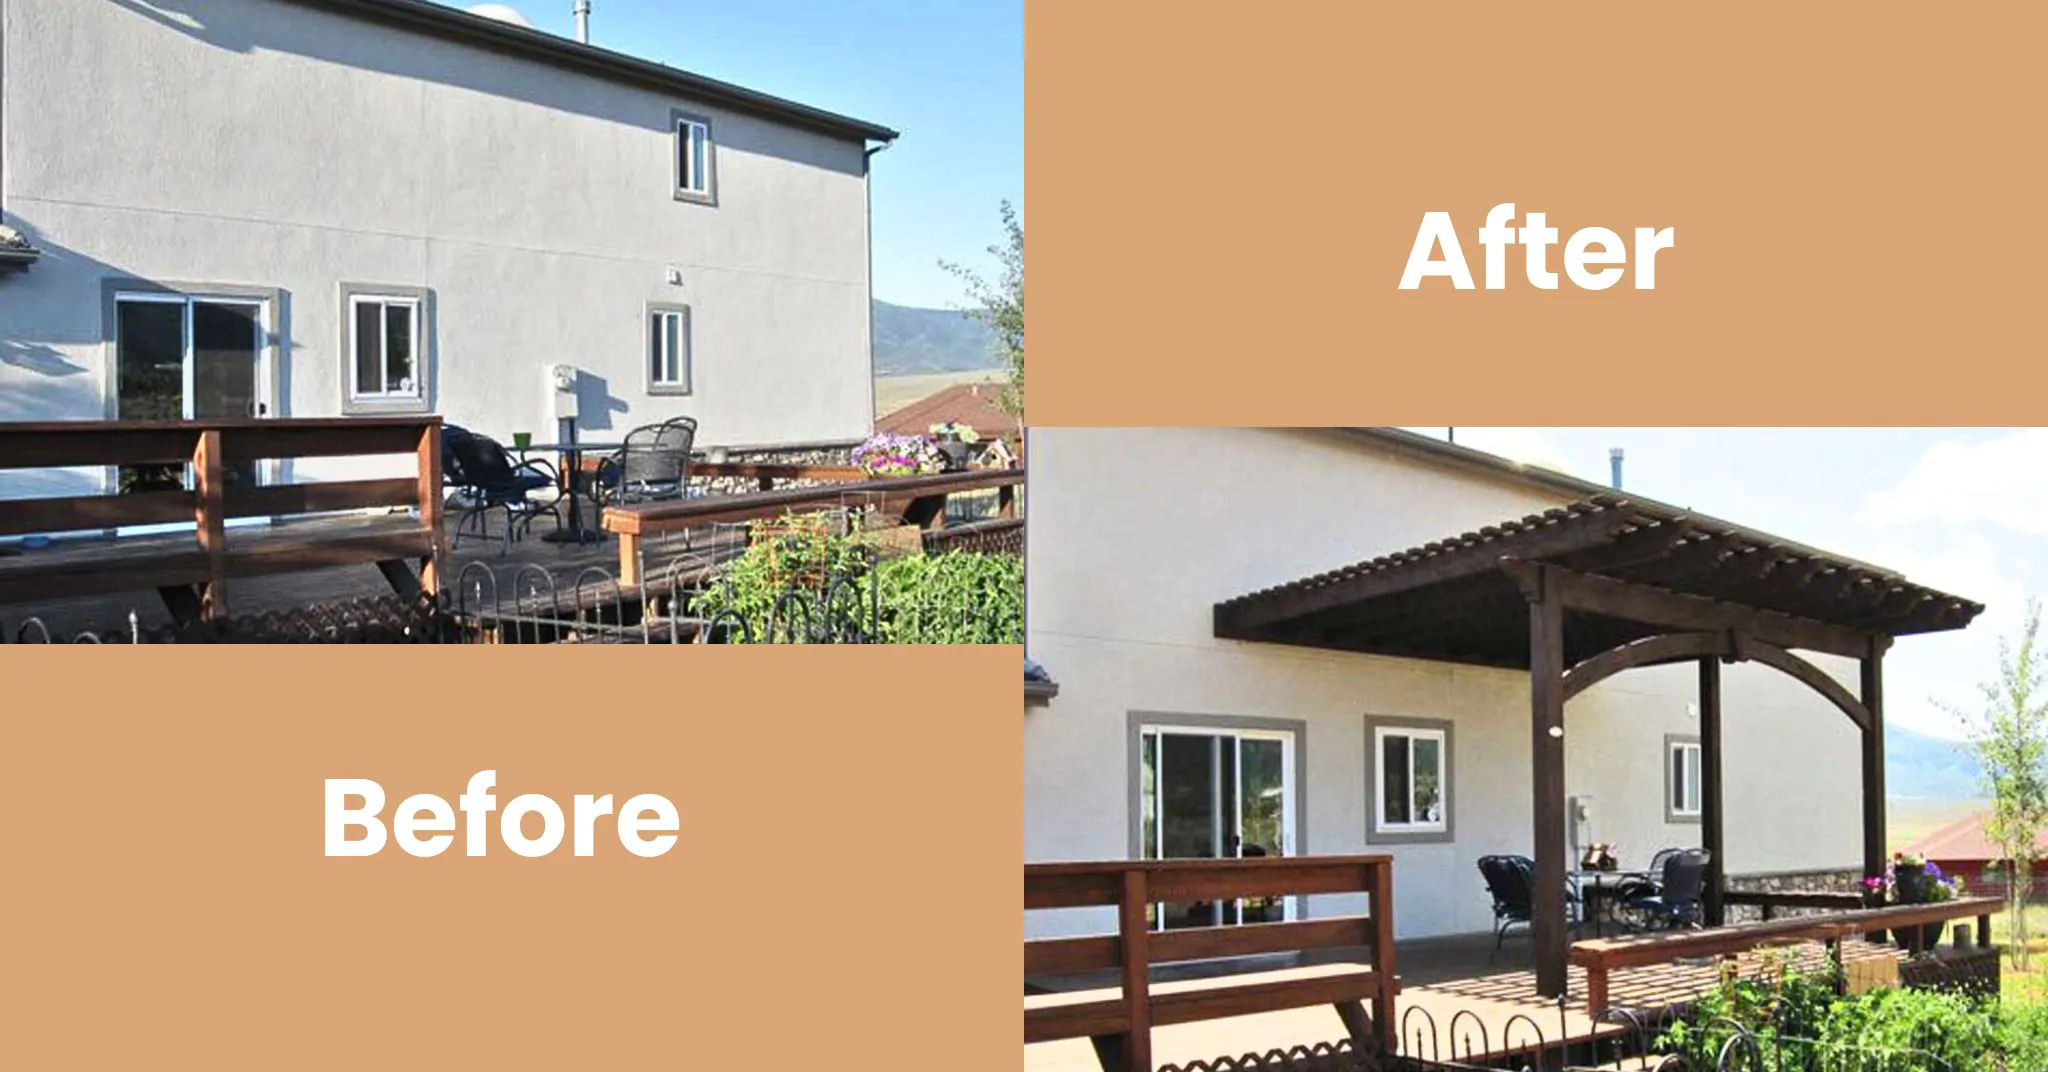 Before and After Patios Installation Service - All Pro Cherry Hill Deck Builders